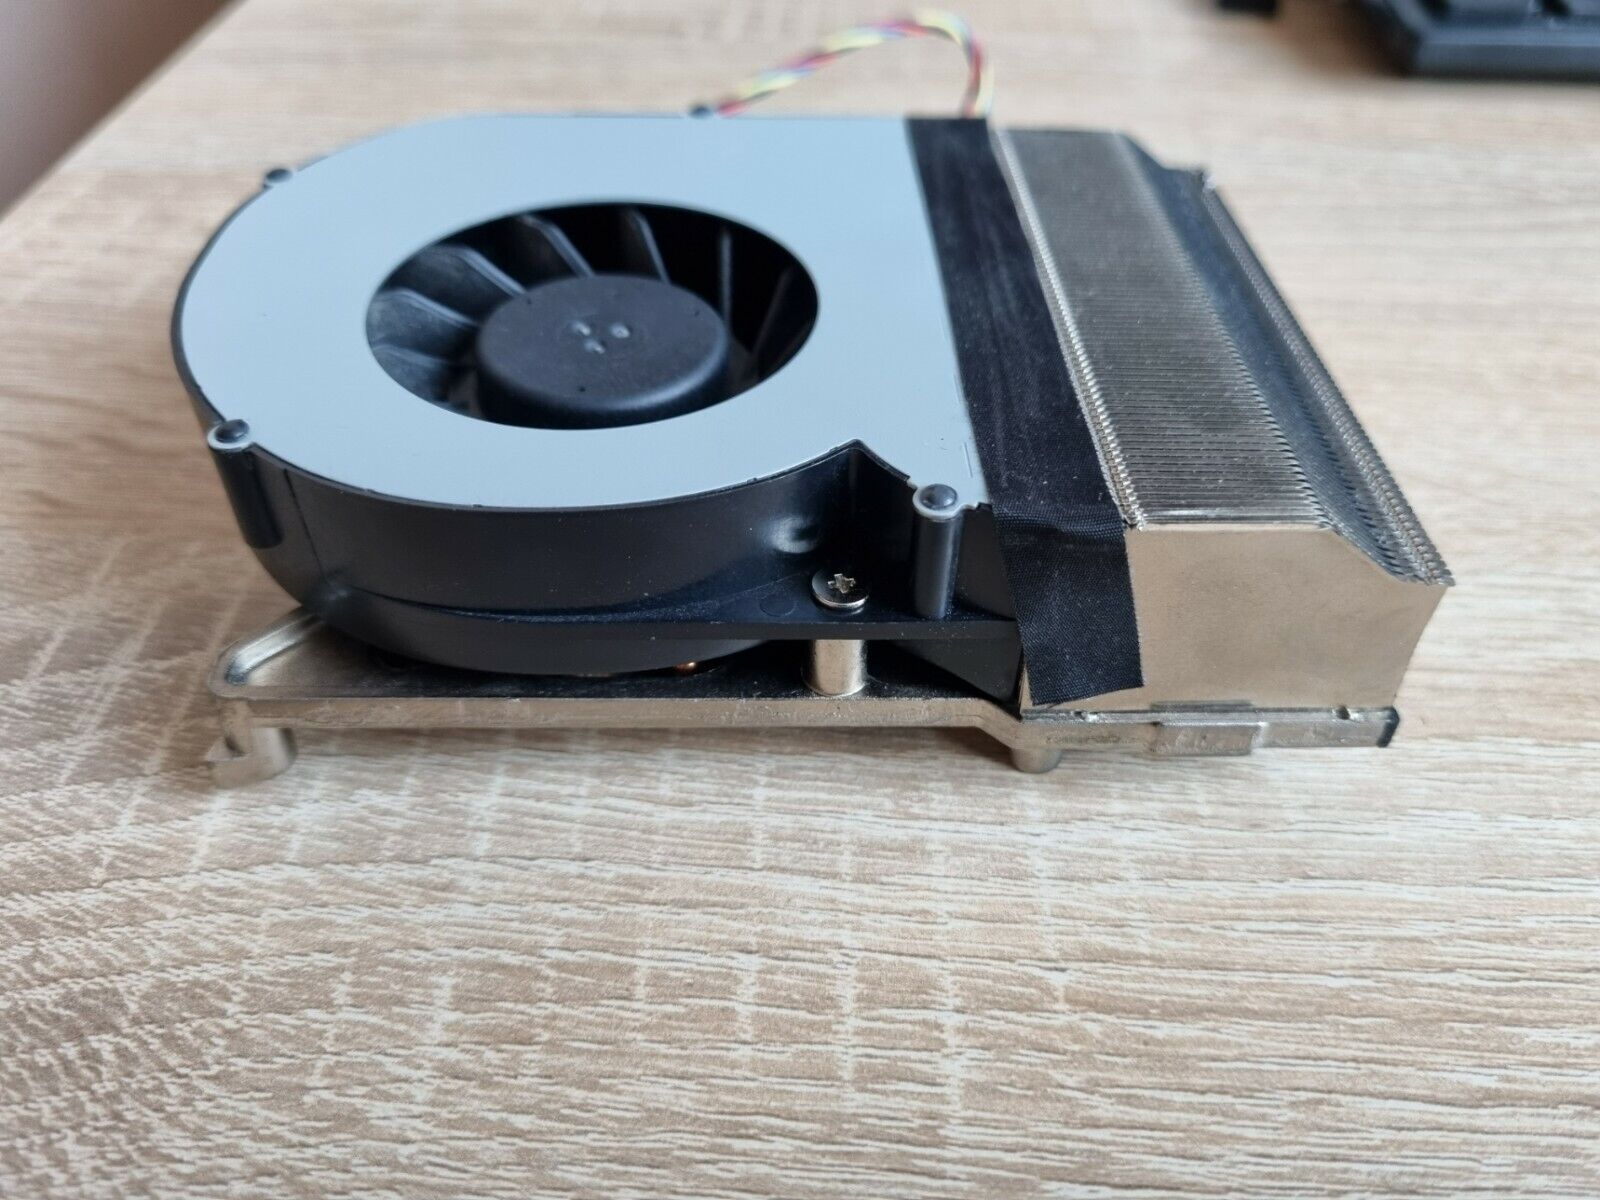 Genuine Asus VC66 CPU heat sink cooler with fan MINT condition fully working OEM